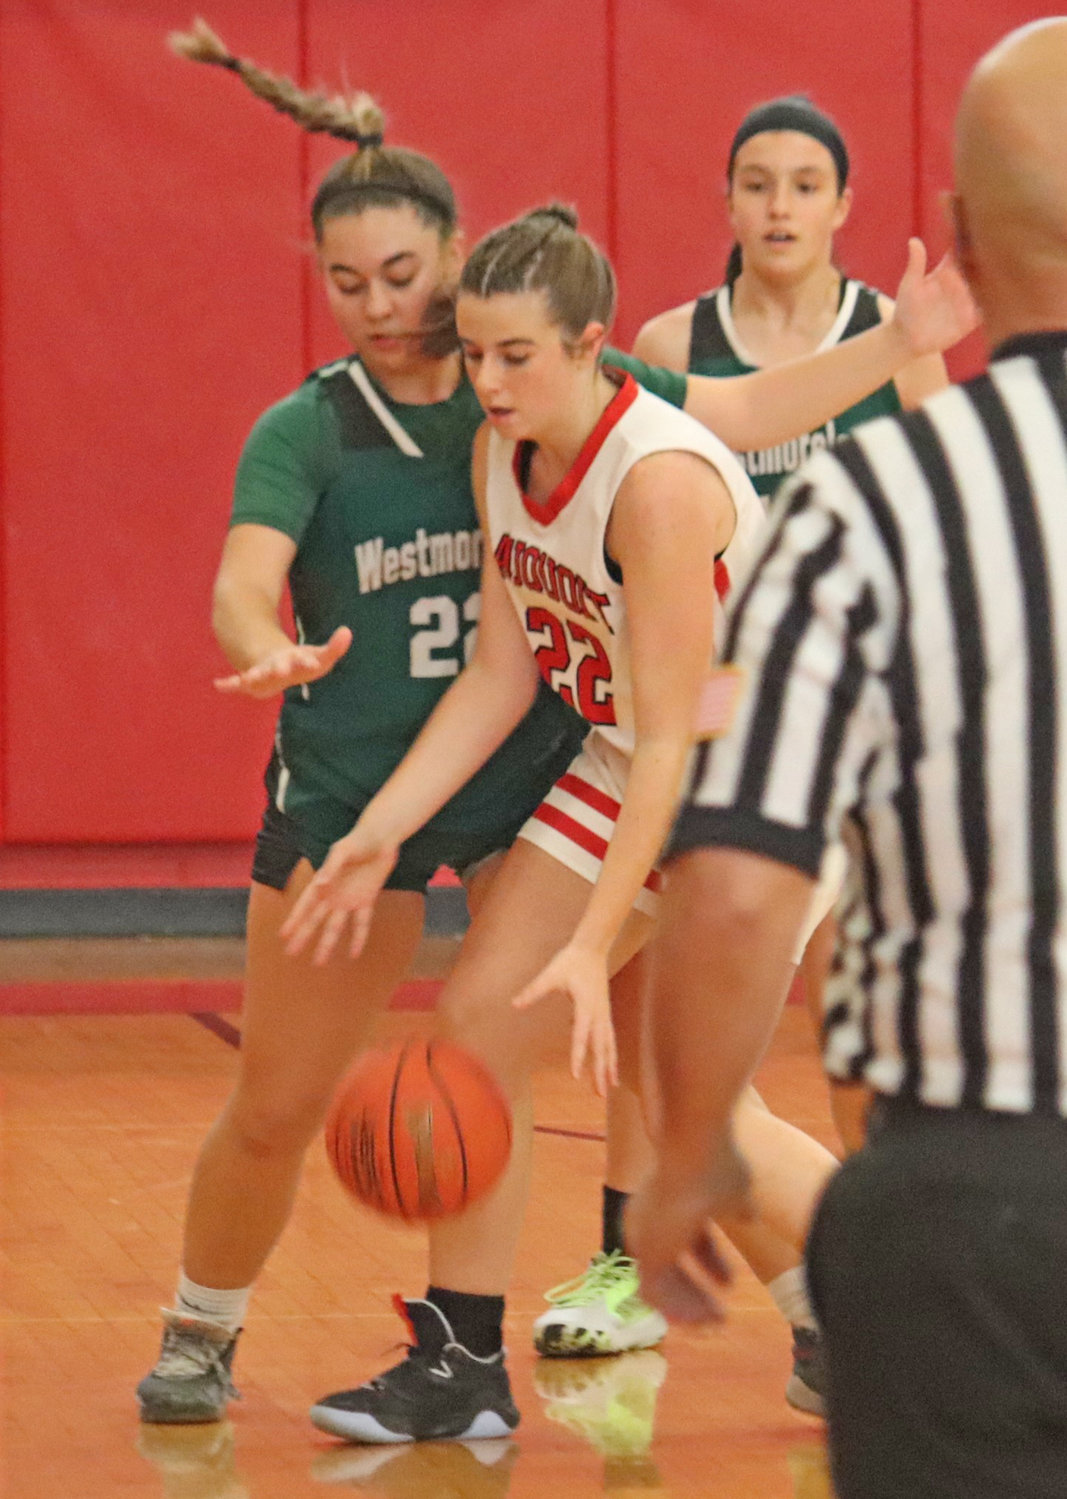 Sauquoit Valley's Makayla Land grabs the ball while defended by Westmoreland's Gabrielle Moore Saturday at home. Land scored five and had 16 rebounds, seven assists, five blocks and five steals but Sauquoit lost 45-34.